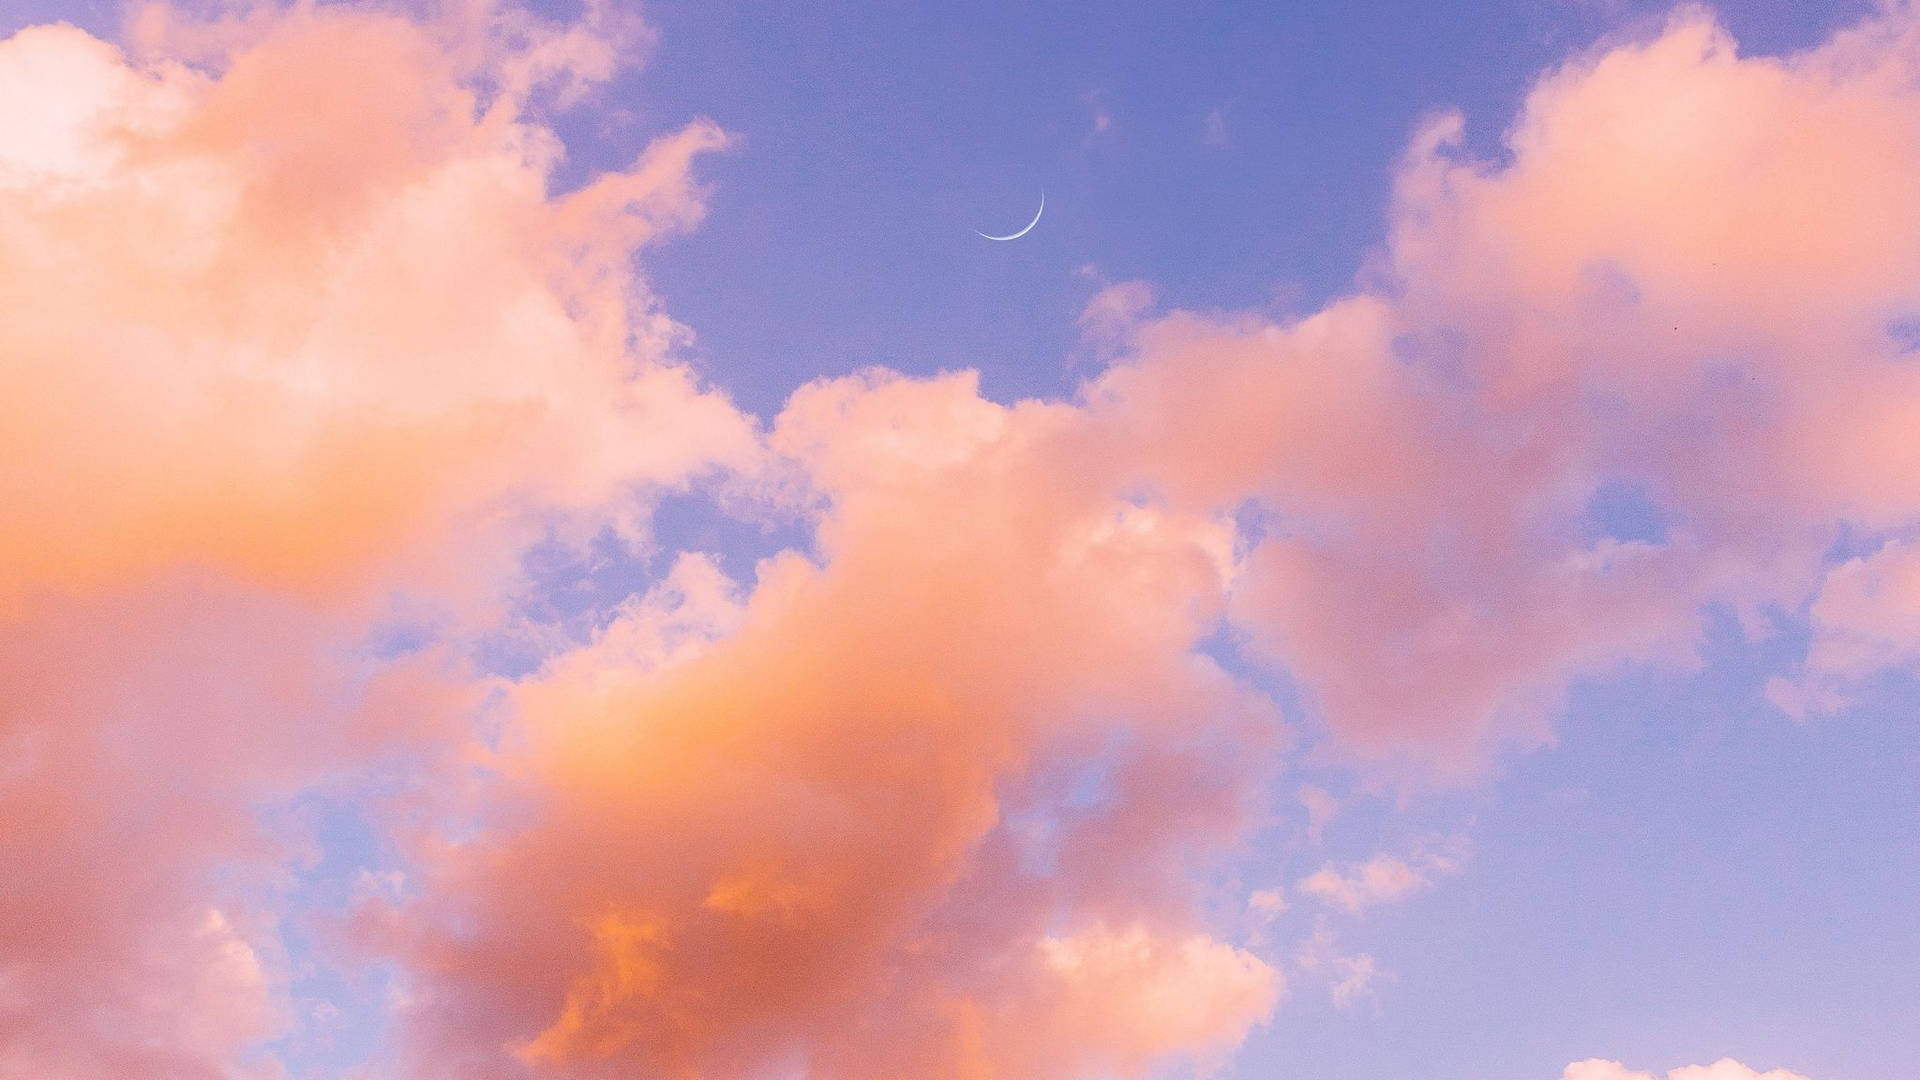 Moon Over The Aesthetic Cloud Background